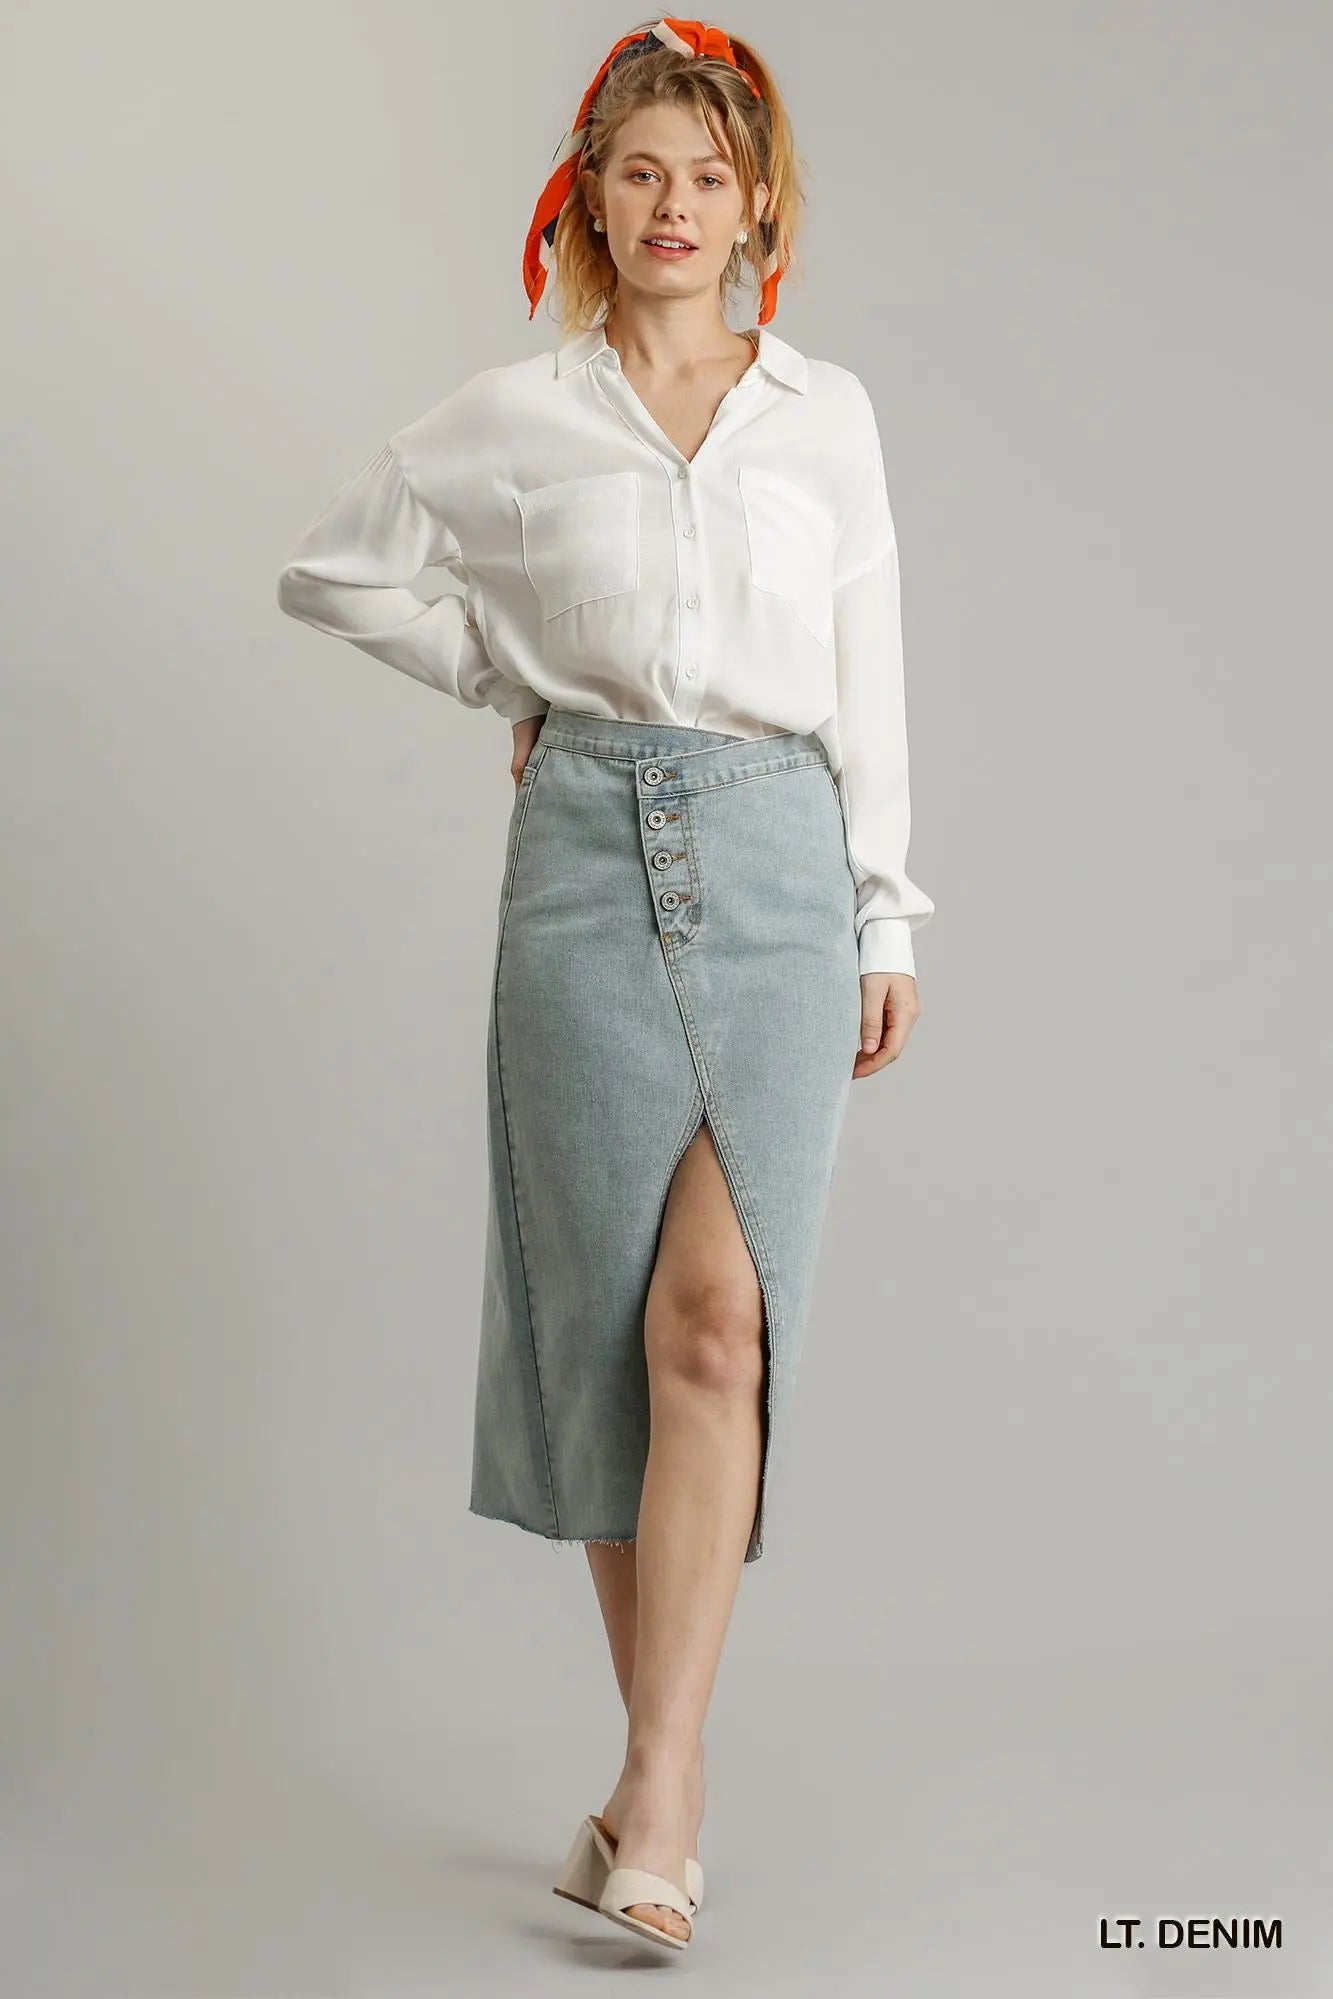 Asymmetrical Waist And Button Up Front Split Denim Skirt With Back Pockets And Unfinished Hem Sunny EvE Fashion